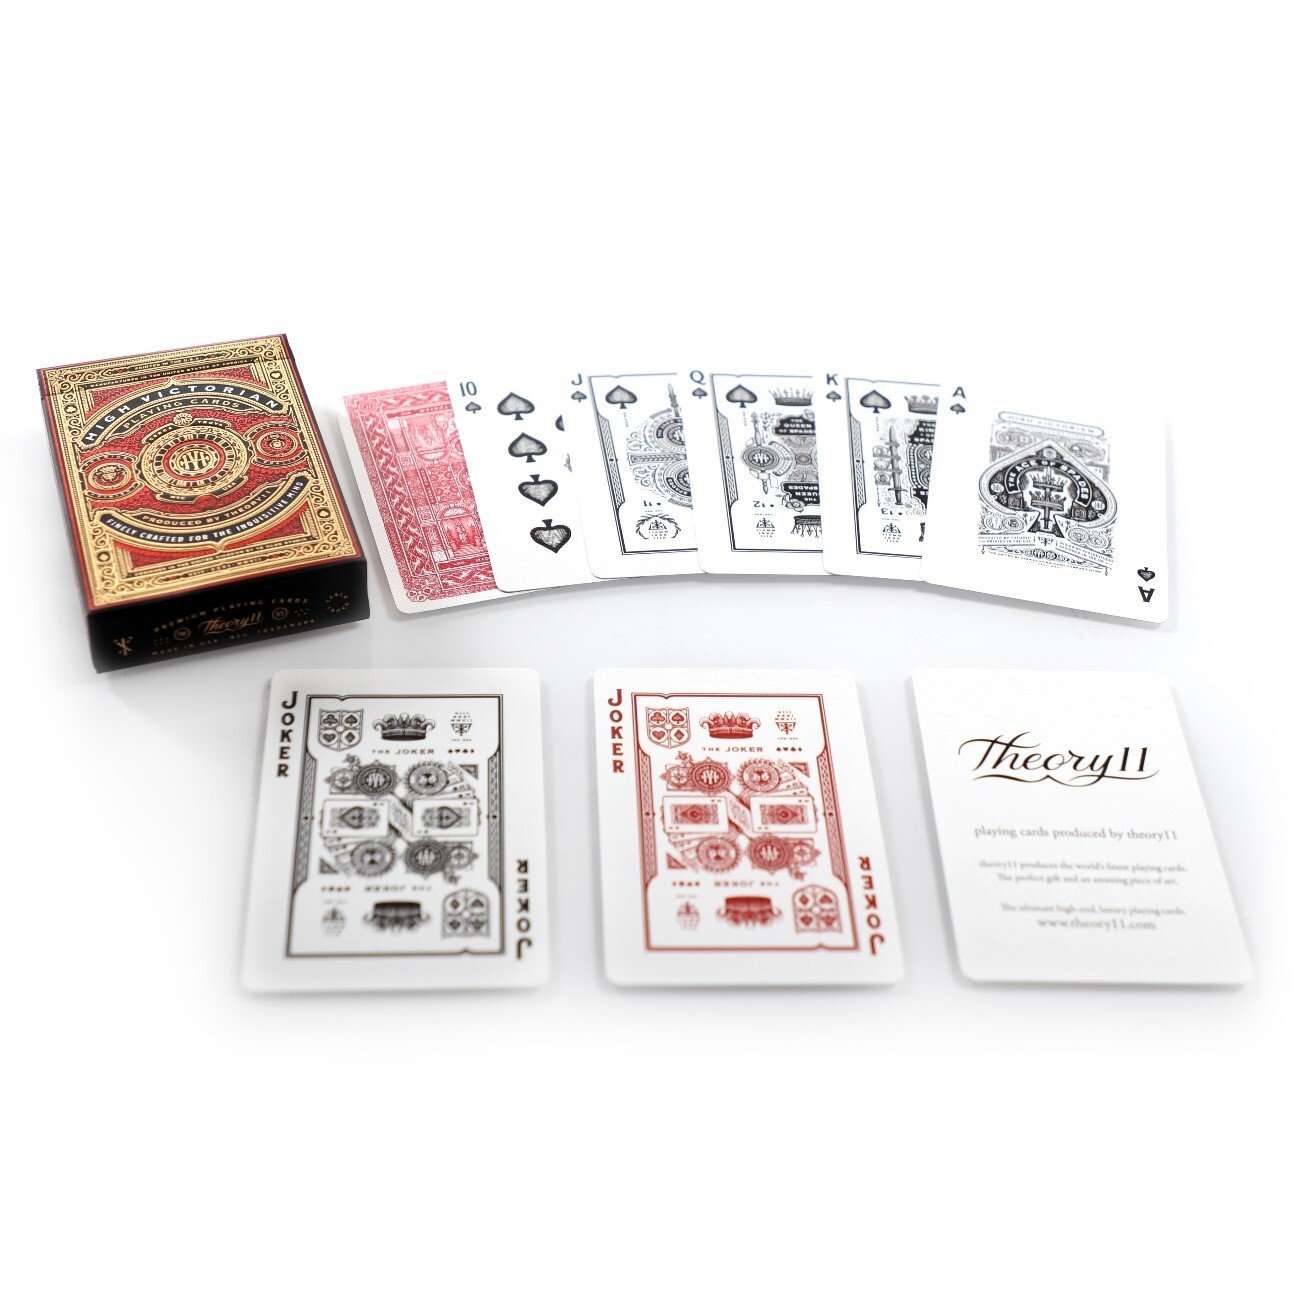 High Card X-Playing Cards In Real Life 